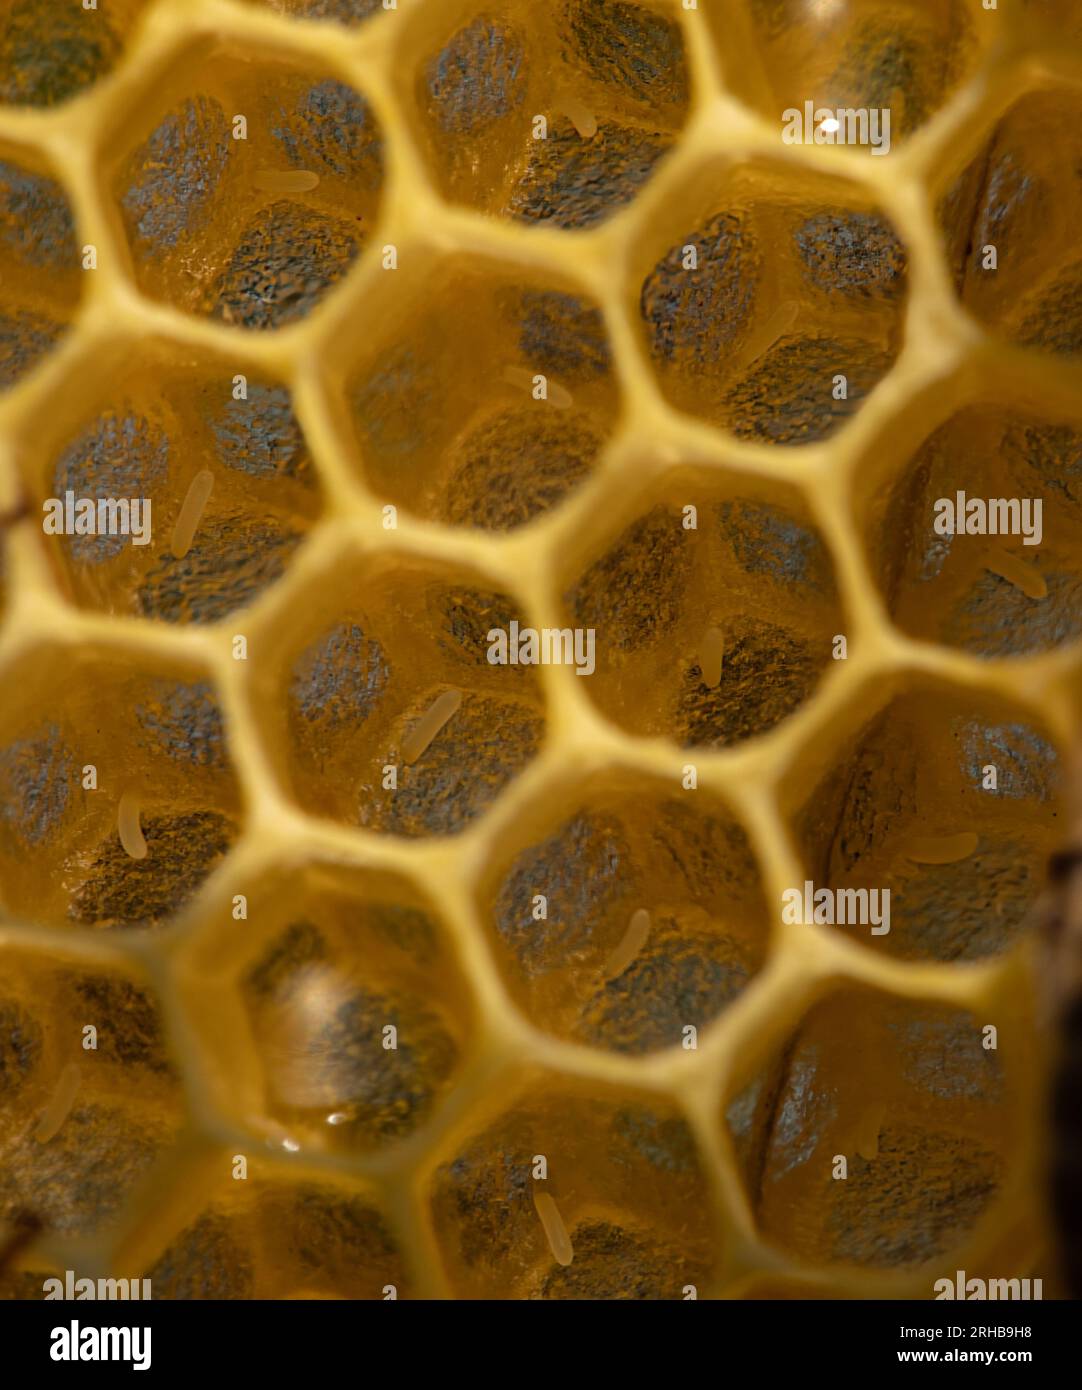 Apiary's Life in Detail: A Close-Up View of Bee Eggs in the Honeycomb Cells Stock Photo